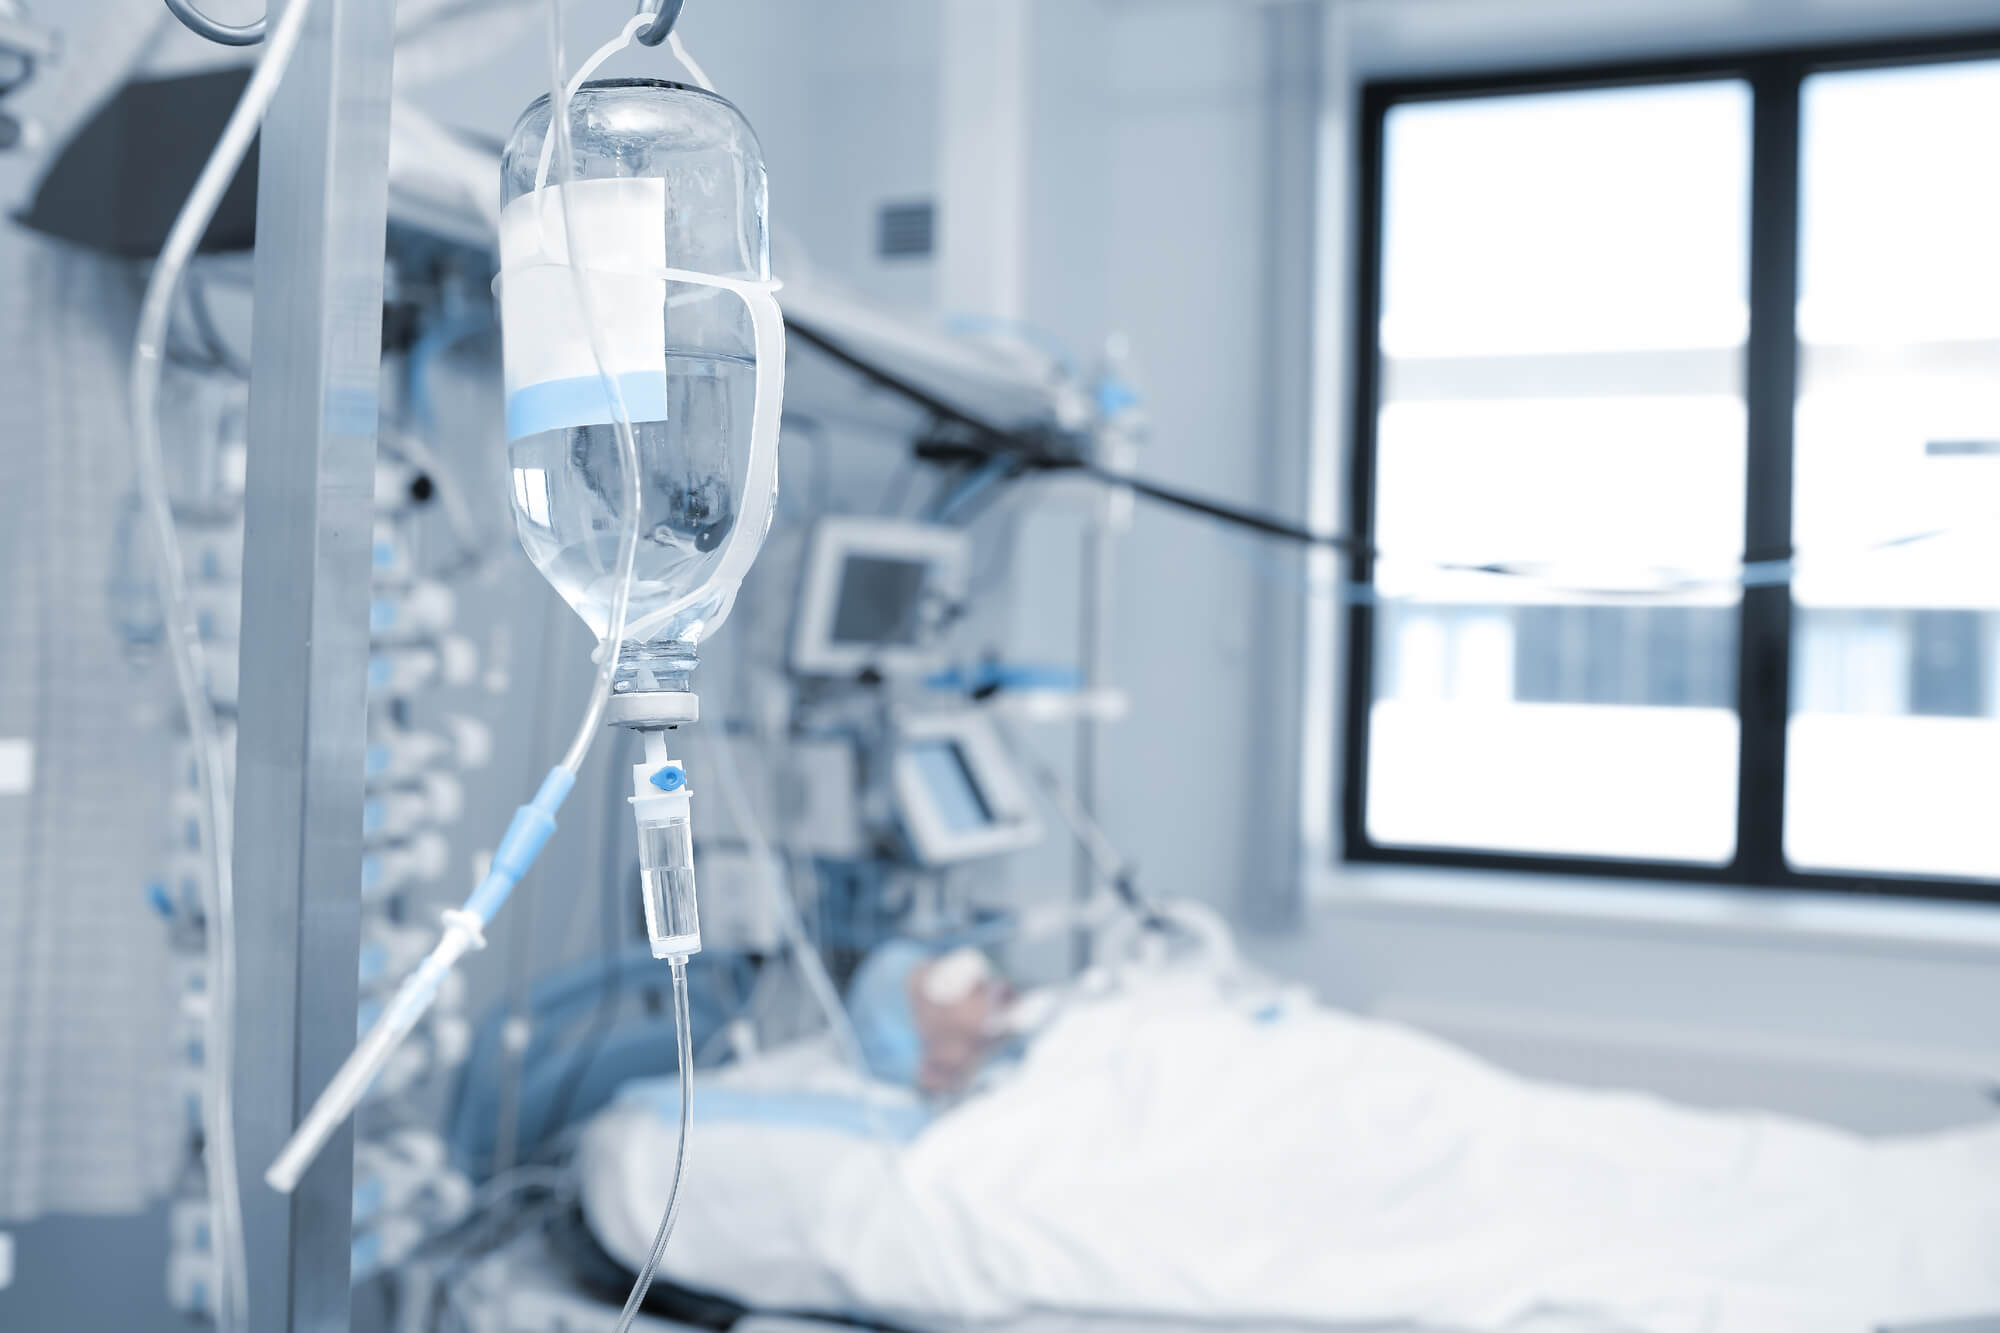 Treatment of a patient in critical condition in the ICU